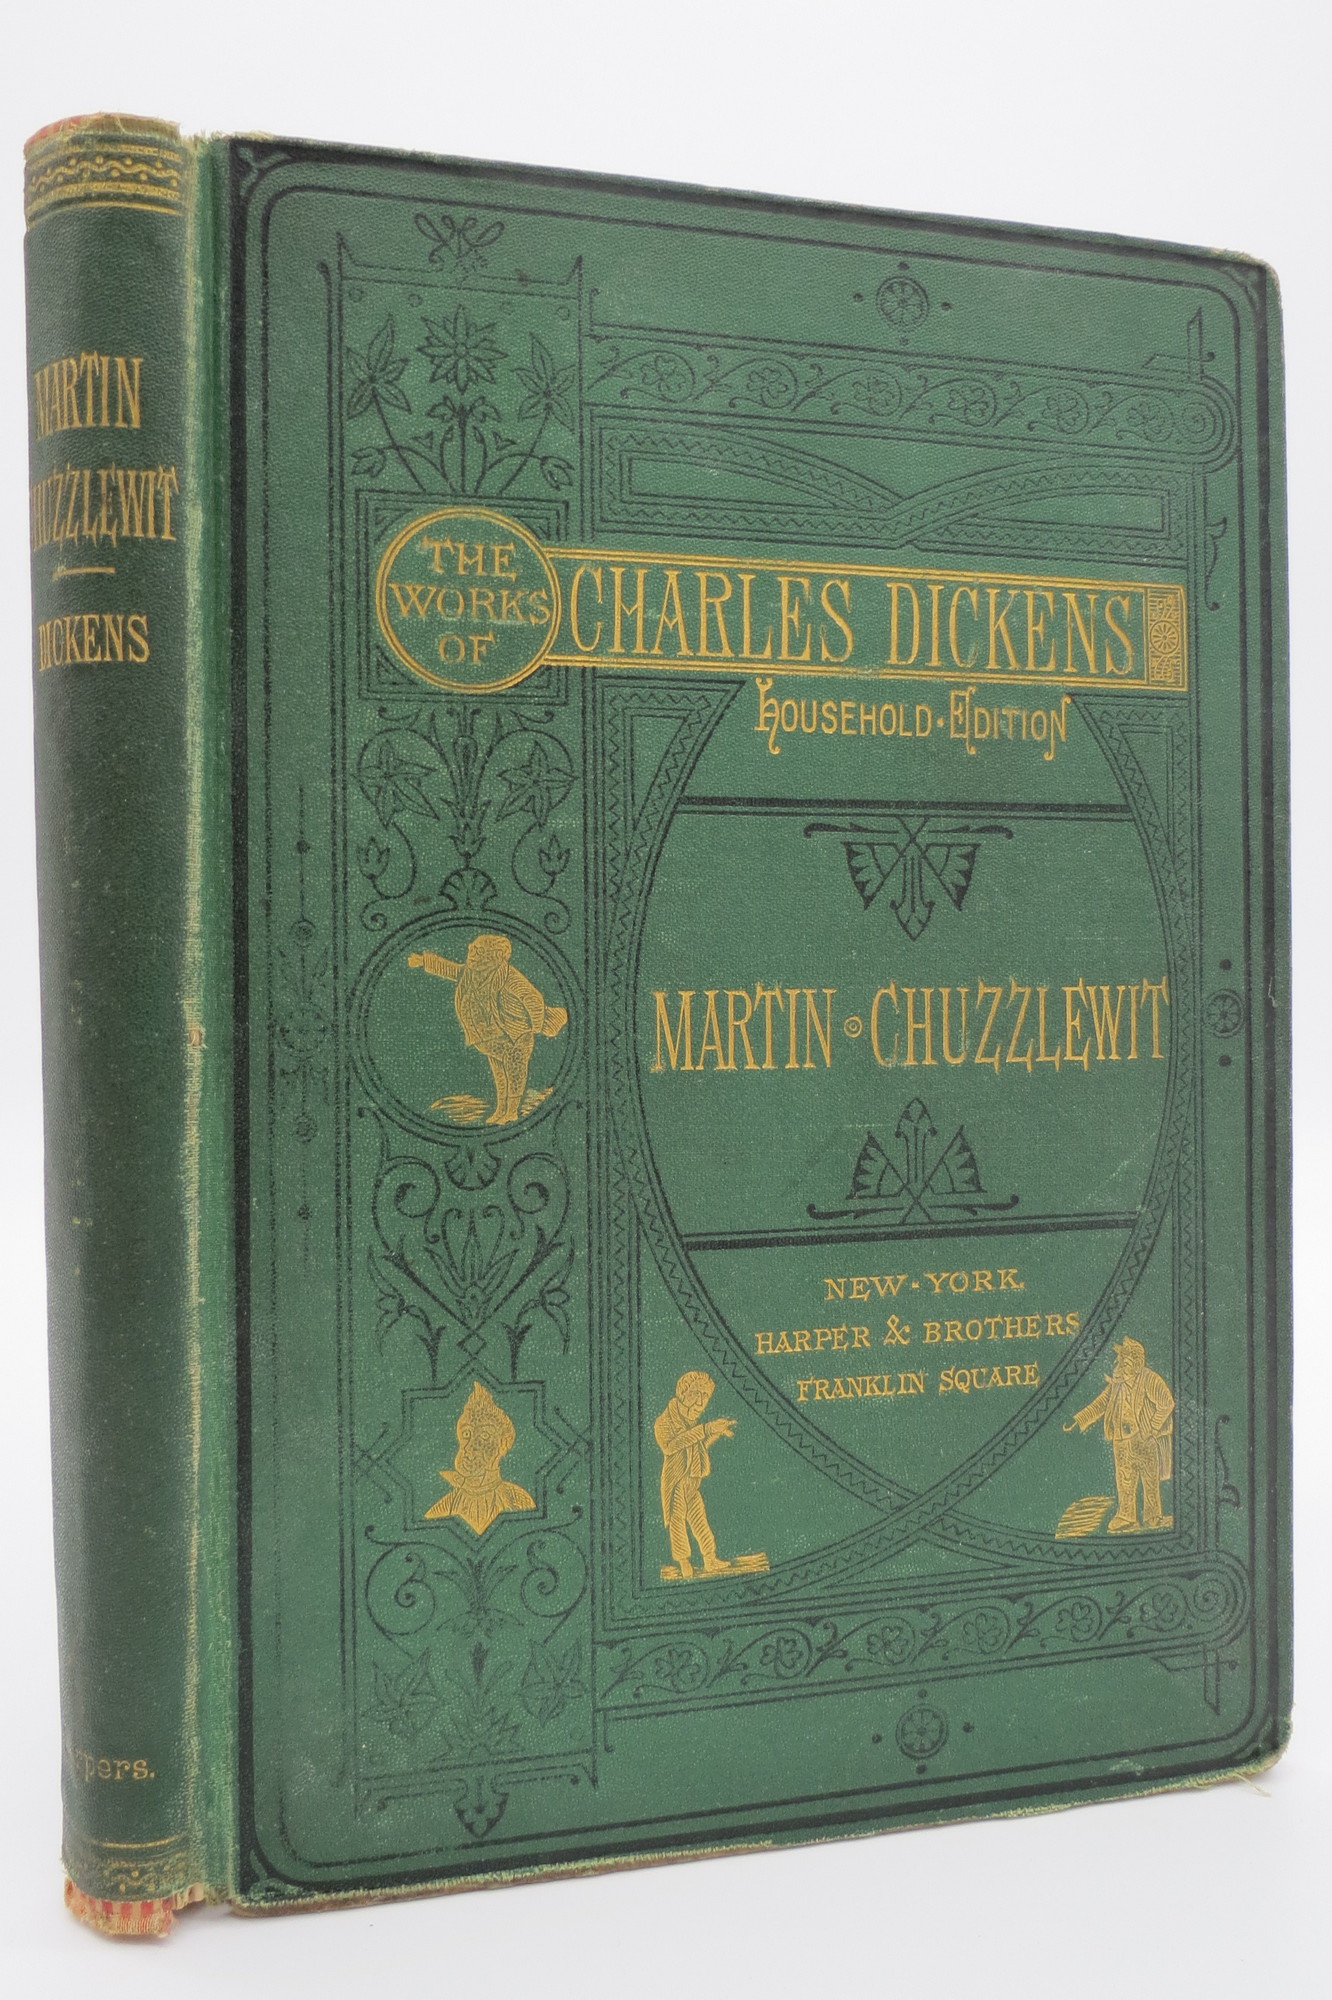 Image for THE LIFE AND ADVENTURES OF MARTIN CHUZZLEWIT (FROM THE WORKS OF CHARLES DICKENS HOUSEHOLD EDITION)   (Fine Victorian Binding)